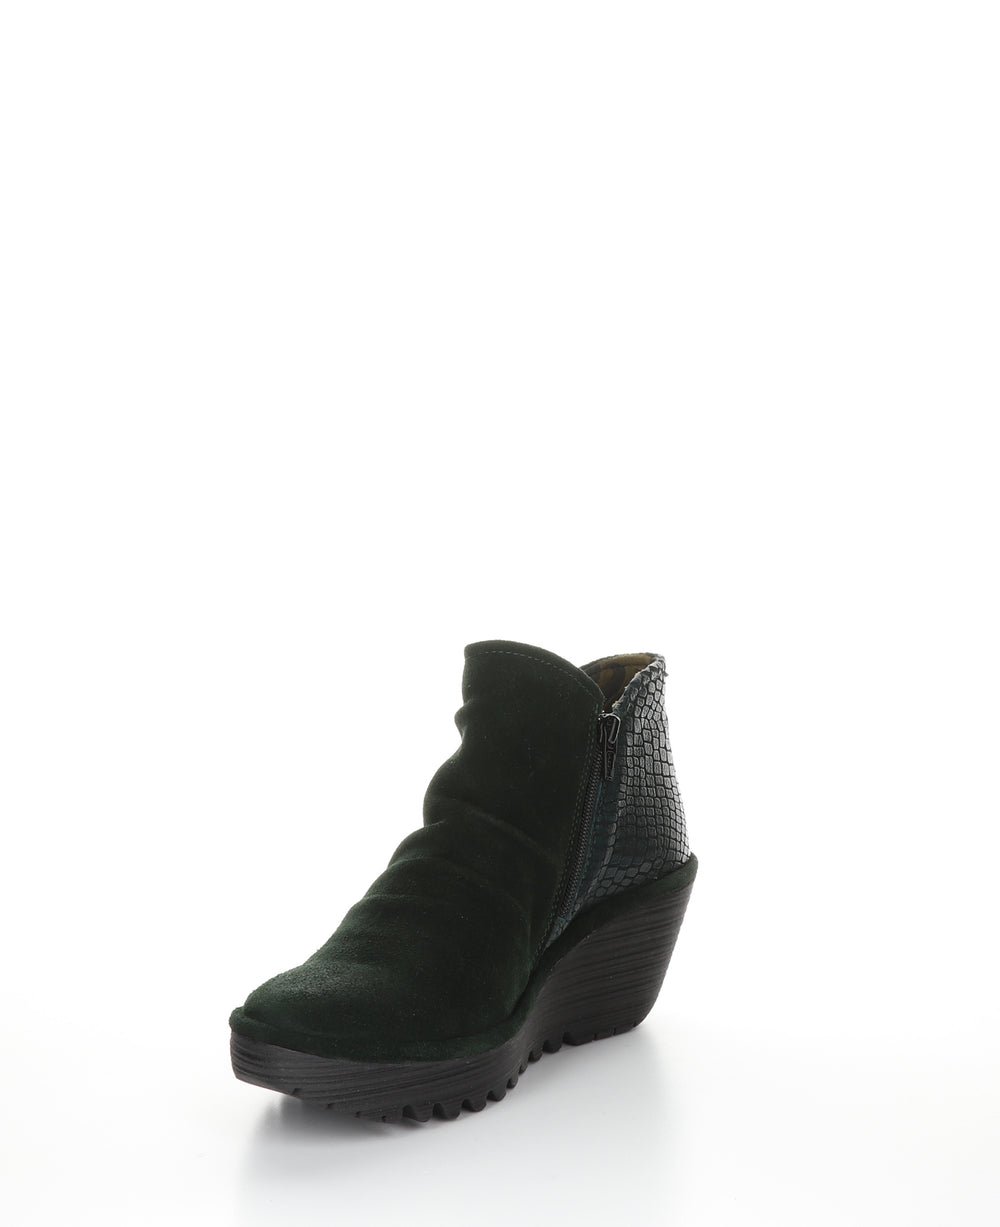 YAMY266FLY Green Forest Zip Up Ankle Boots|YAMY266FLY Bottines avec Fermeture Zippée in Vert